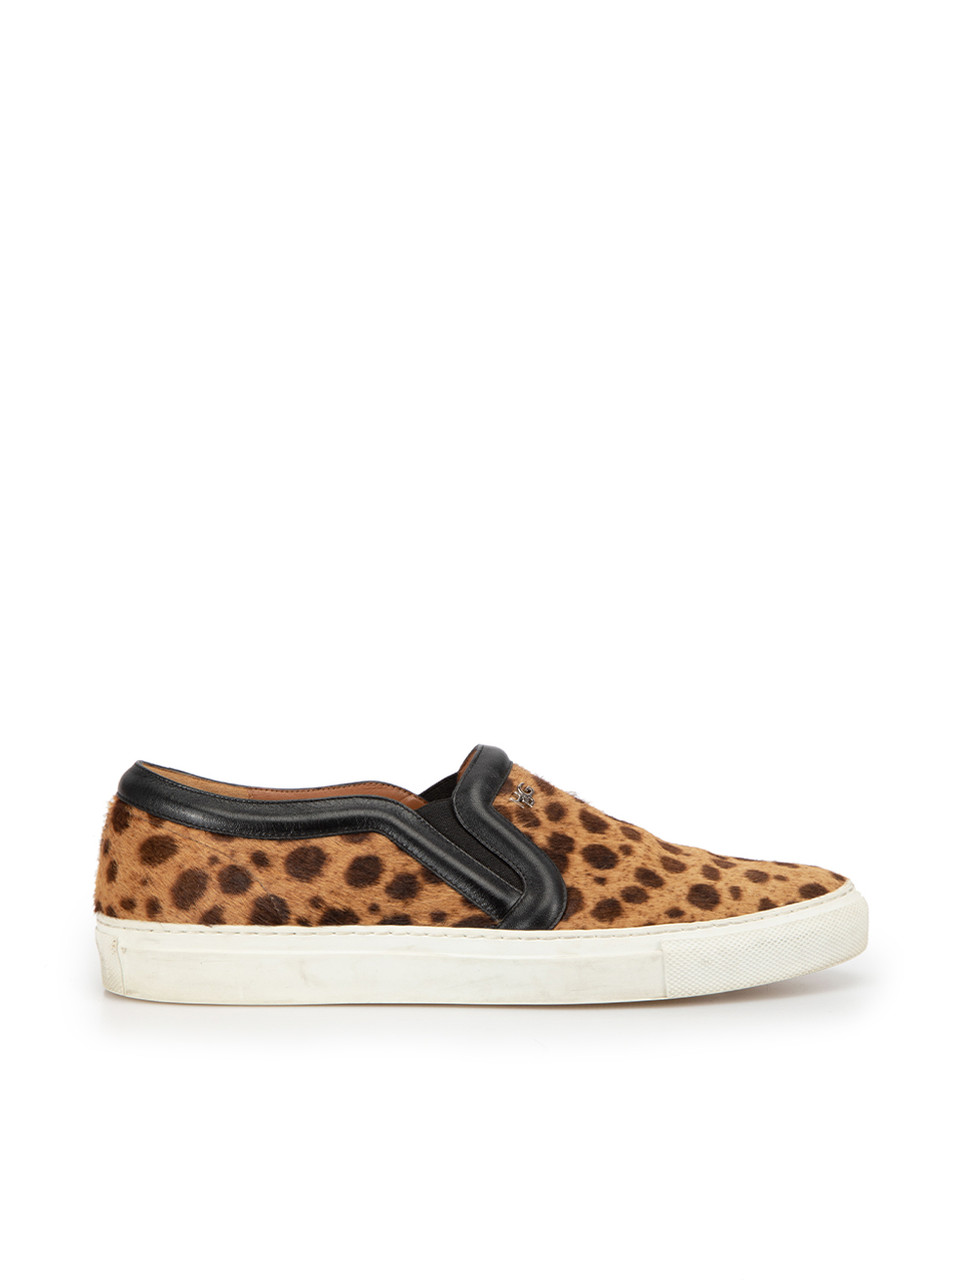 Givenchy Brown Pony Hair Animal Print Trainers